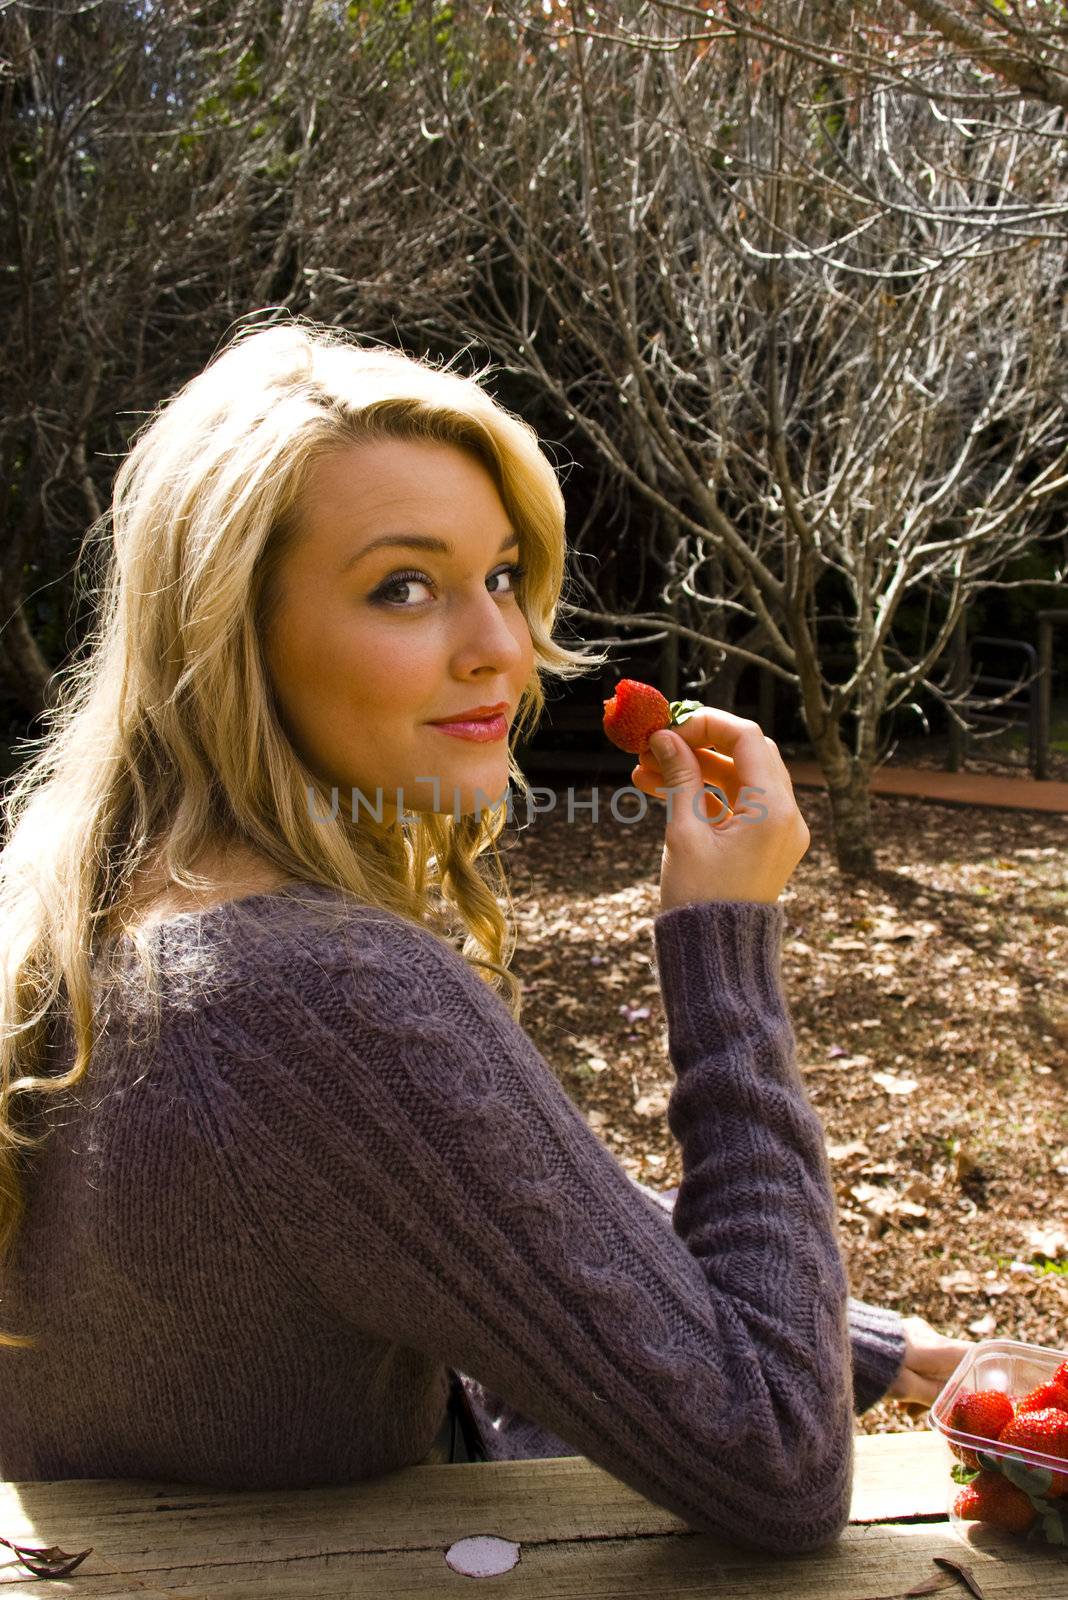 Beautiful young woman eating strawberries in the park, looking over her shoulder